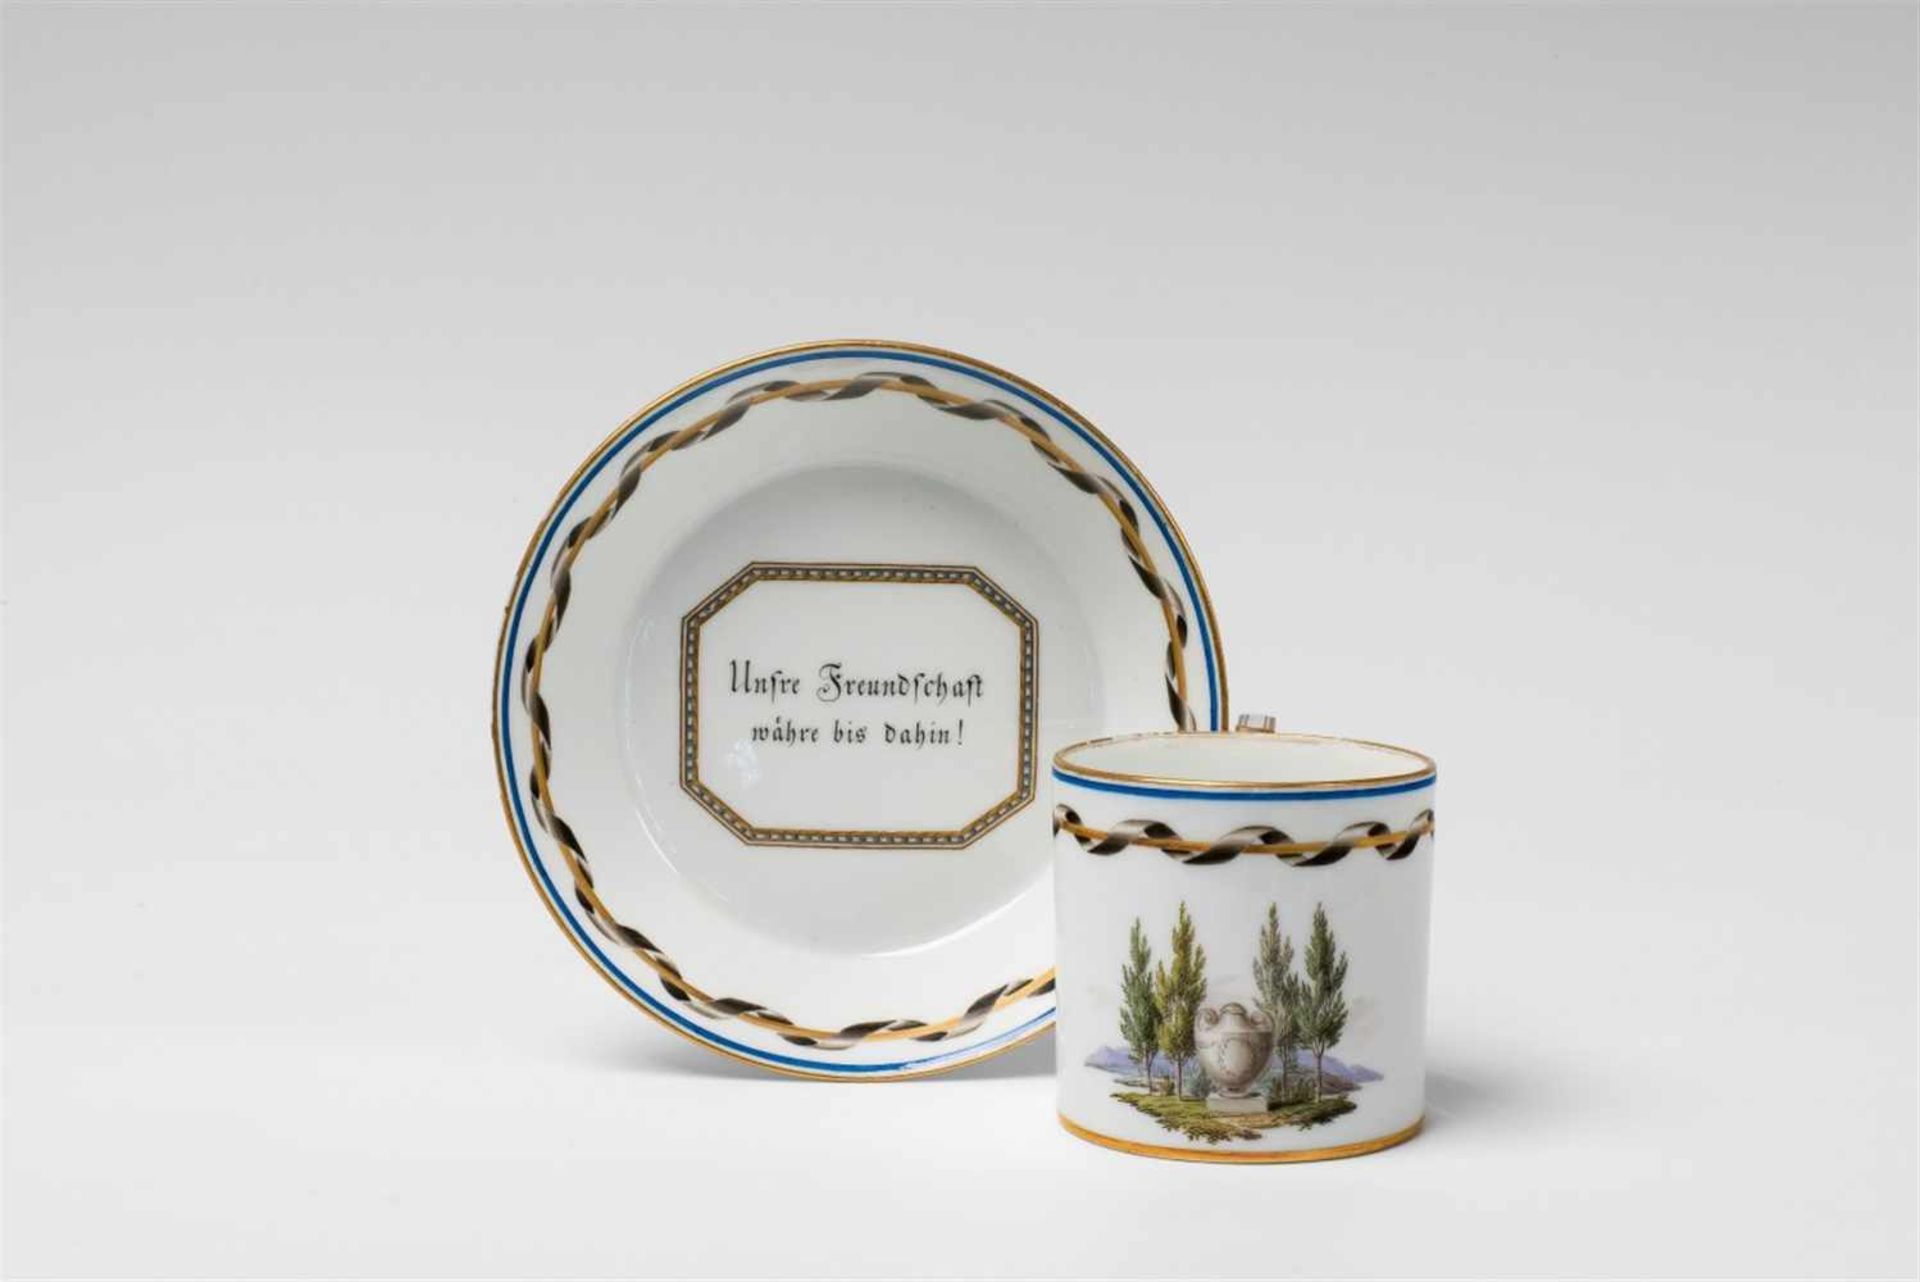 Two Meissen porcelain friendship cupsOf cylindrical and flaring form, with original saucers and